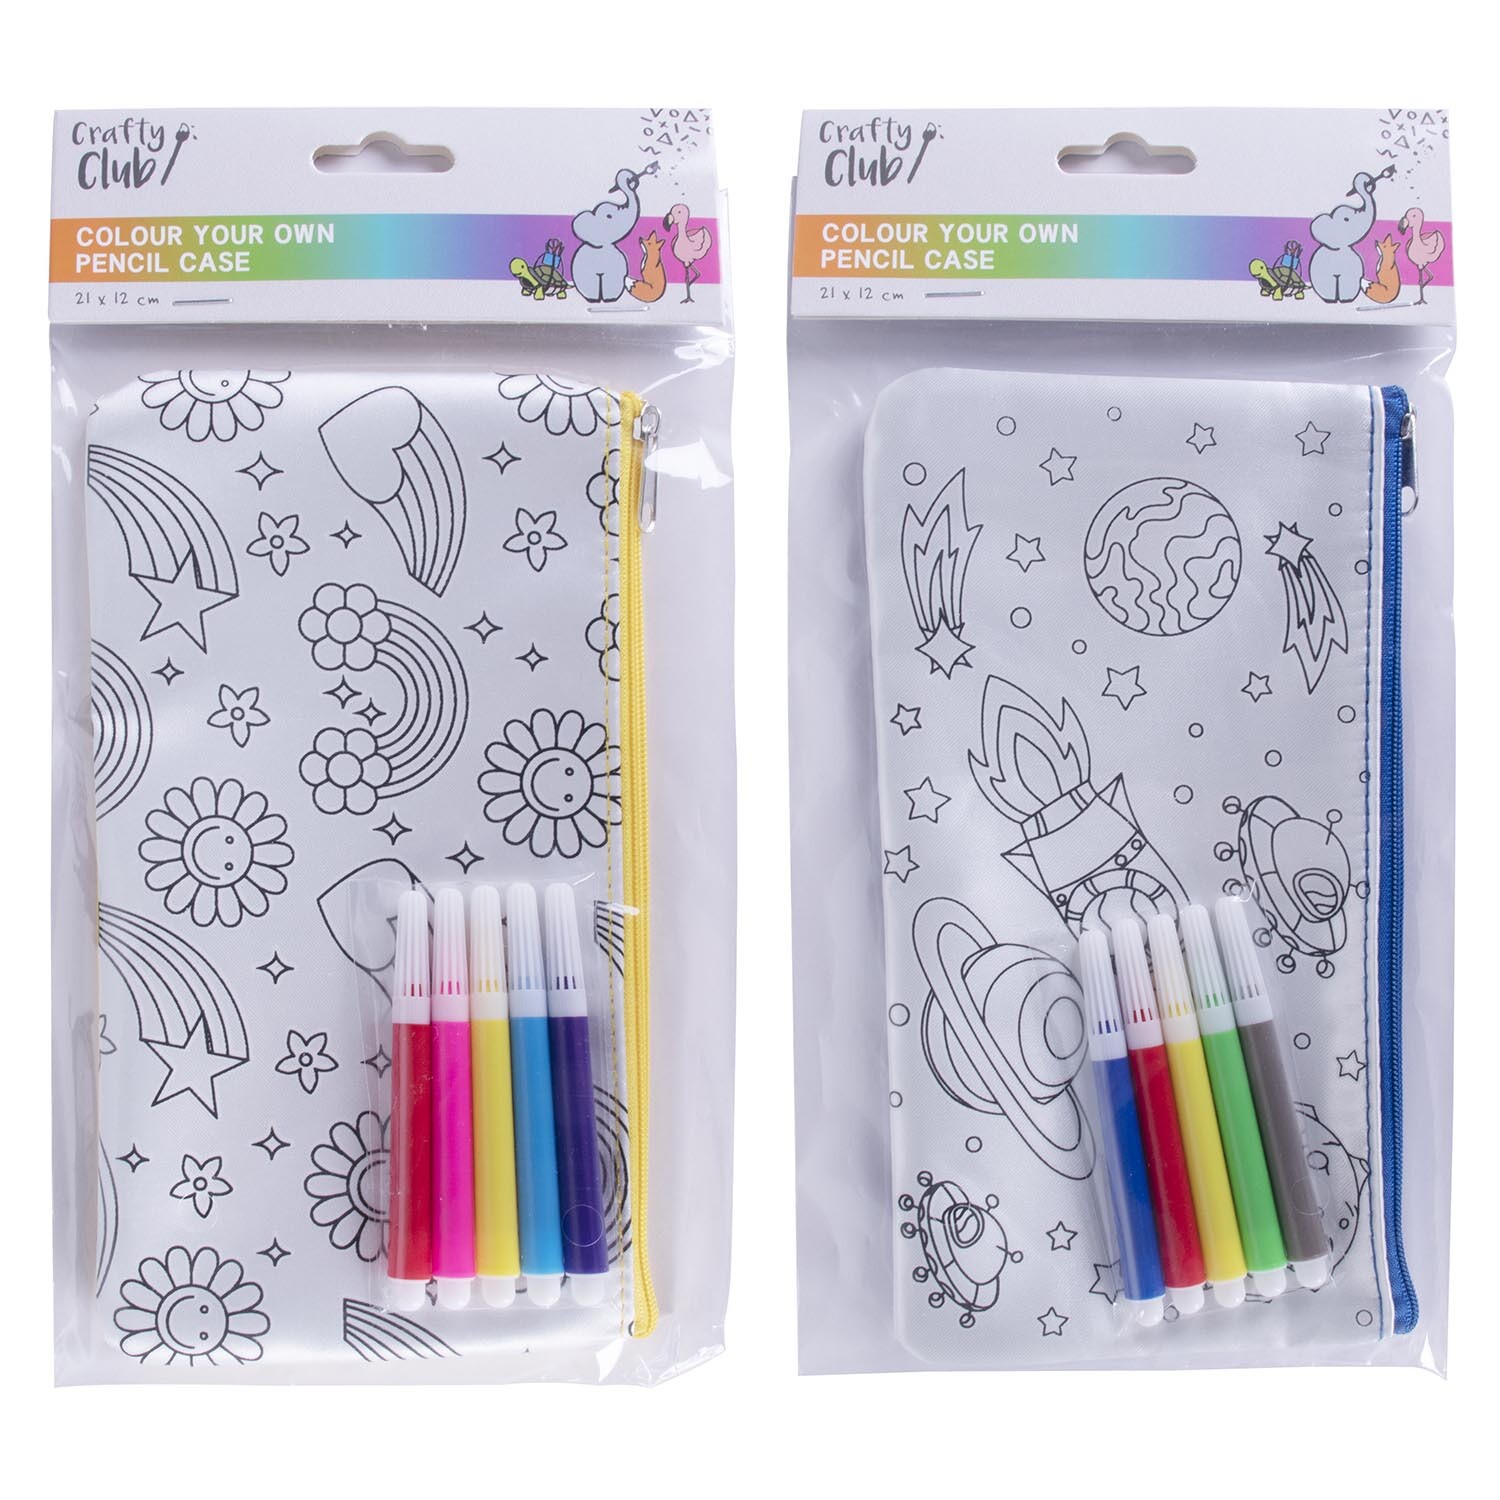 Single Crafty Club Colour Your Own Pencil Case Kit in Assorted styles Image